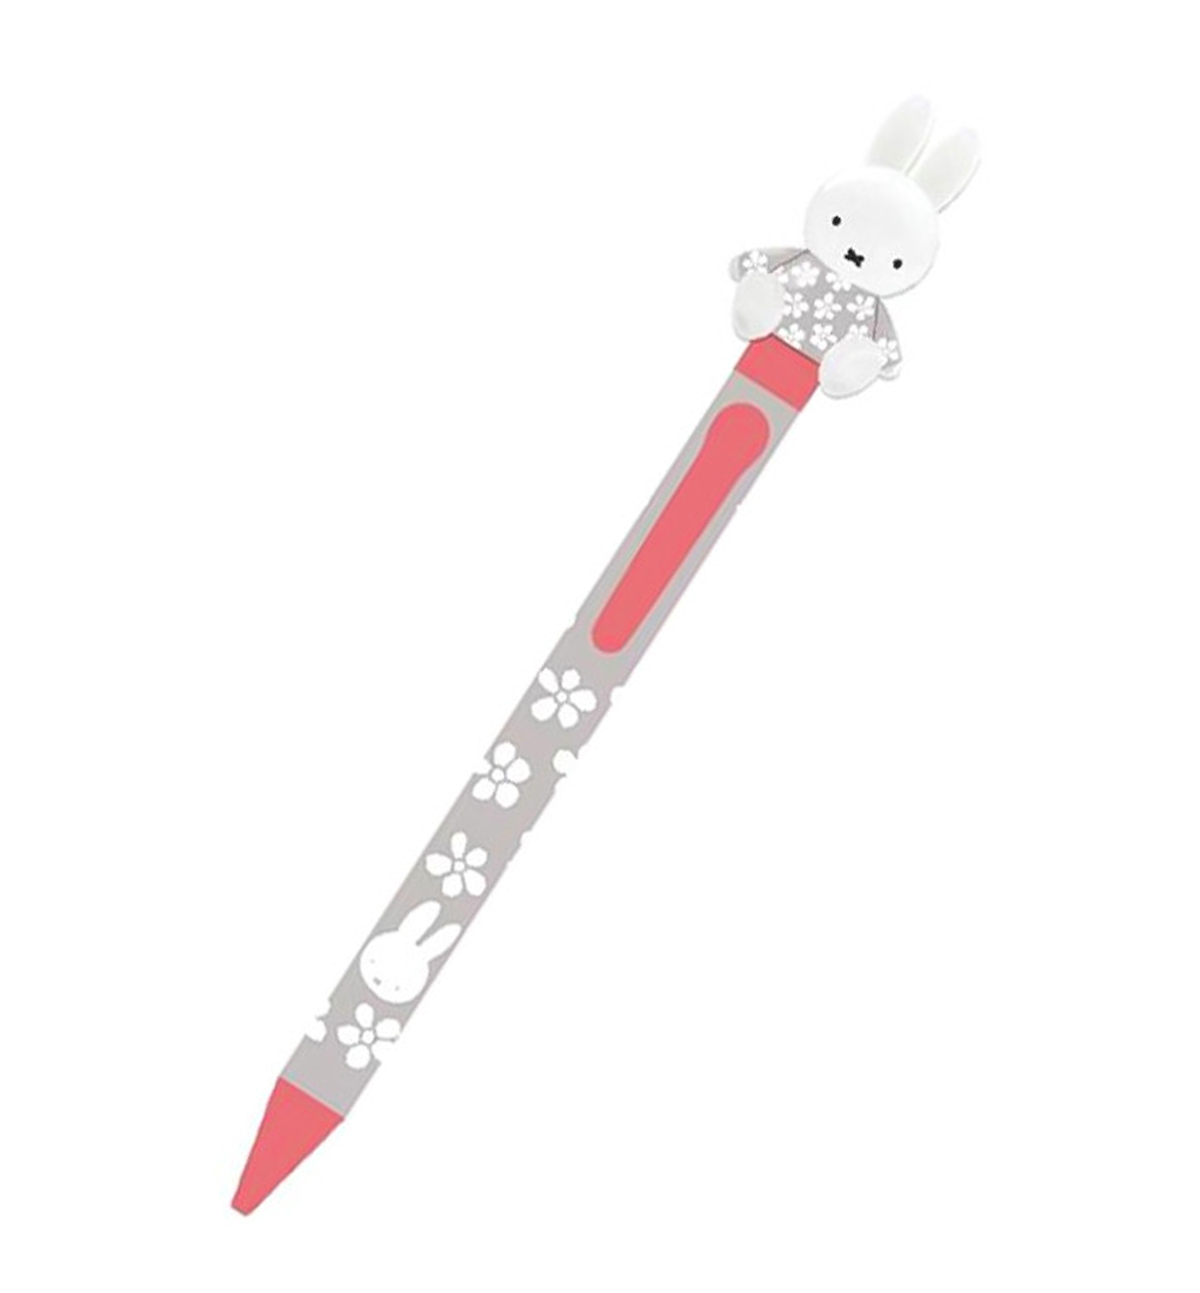 Miffy Action 0.7mm Pen [Gray]